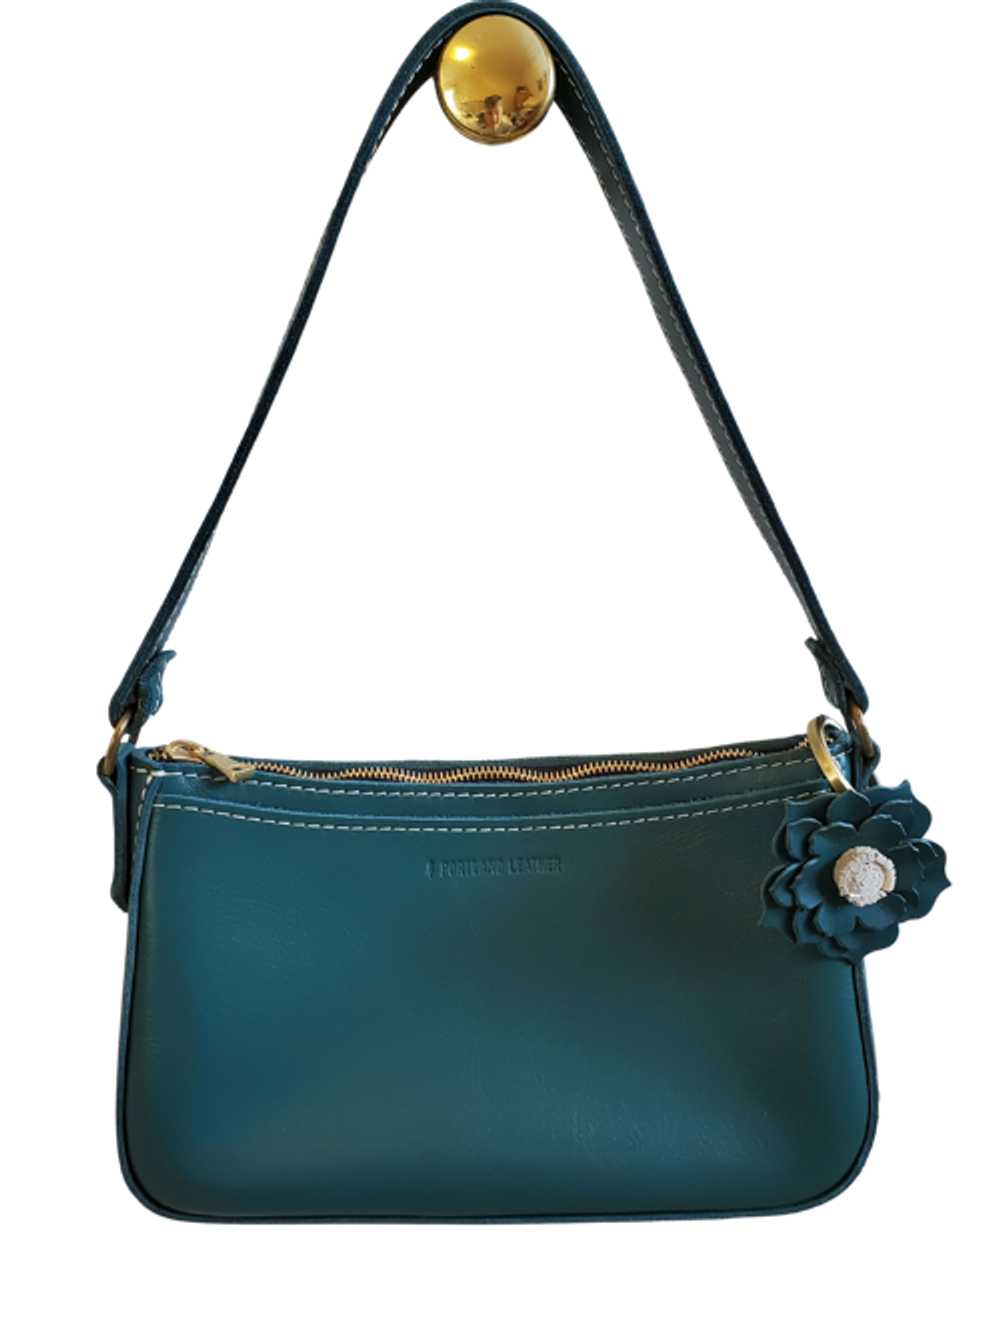 Portland Leather Premium Lucy Baguette in Peacock - image 1